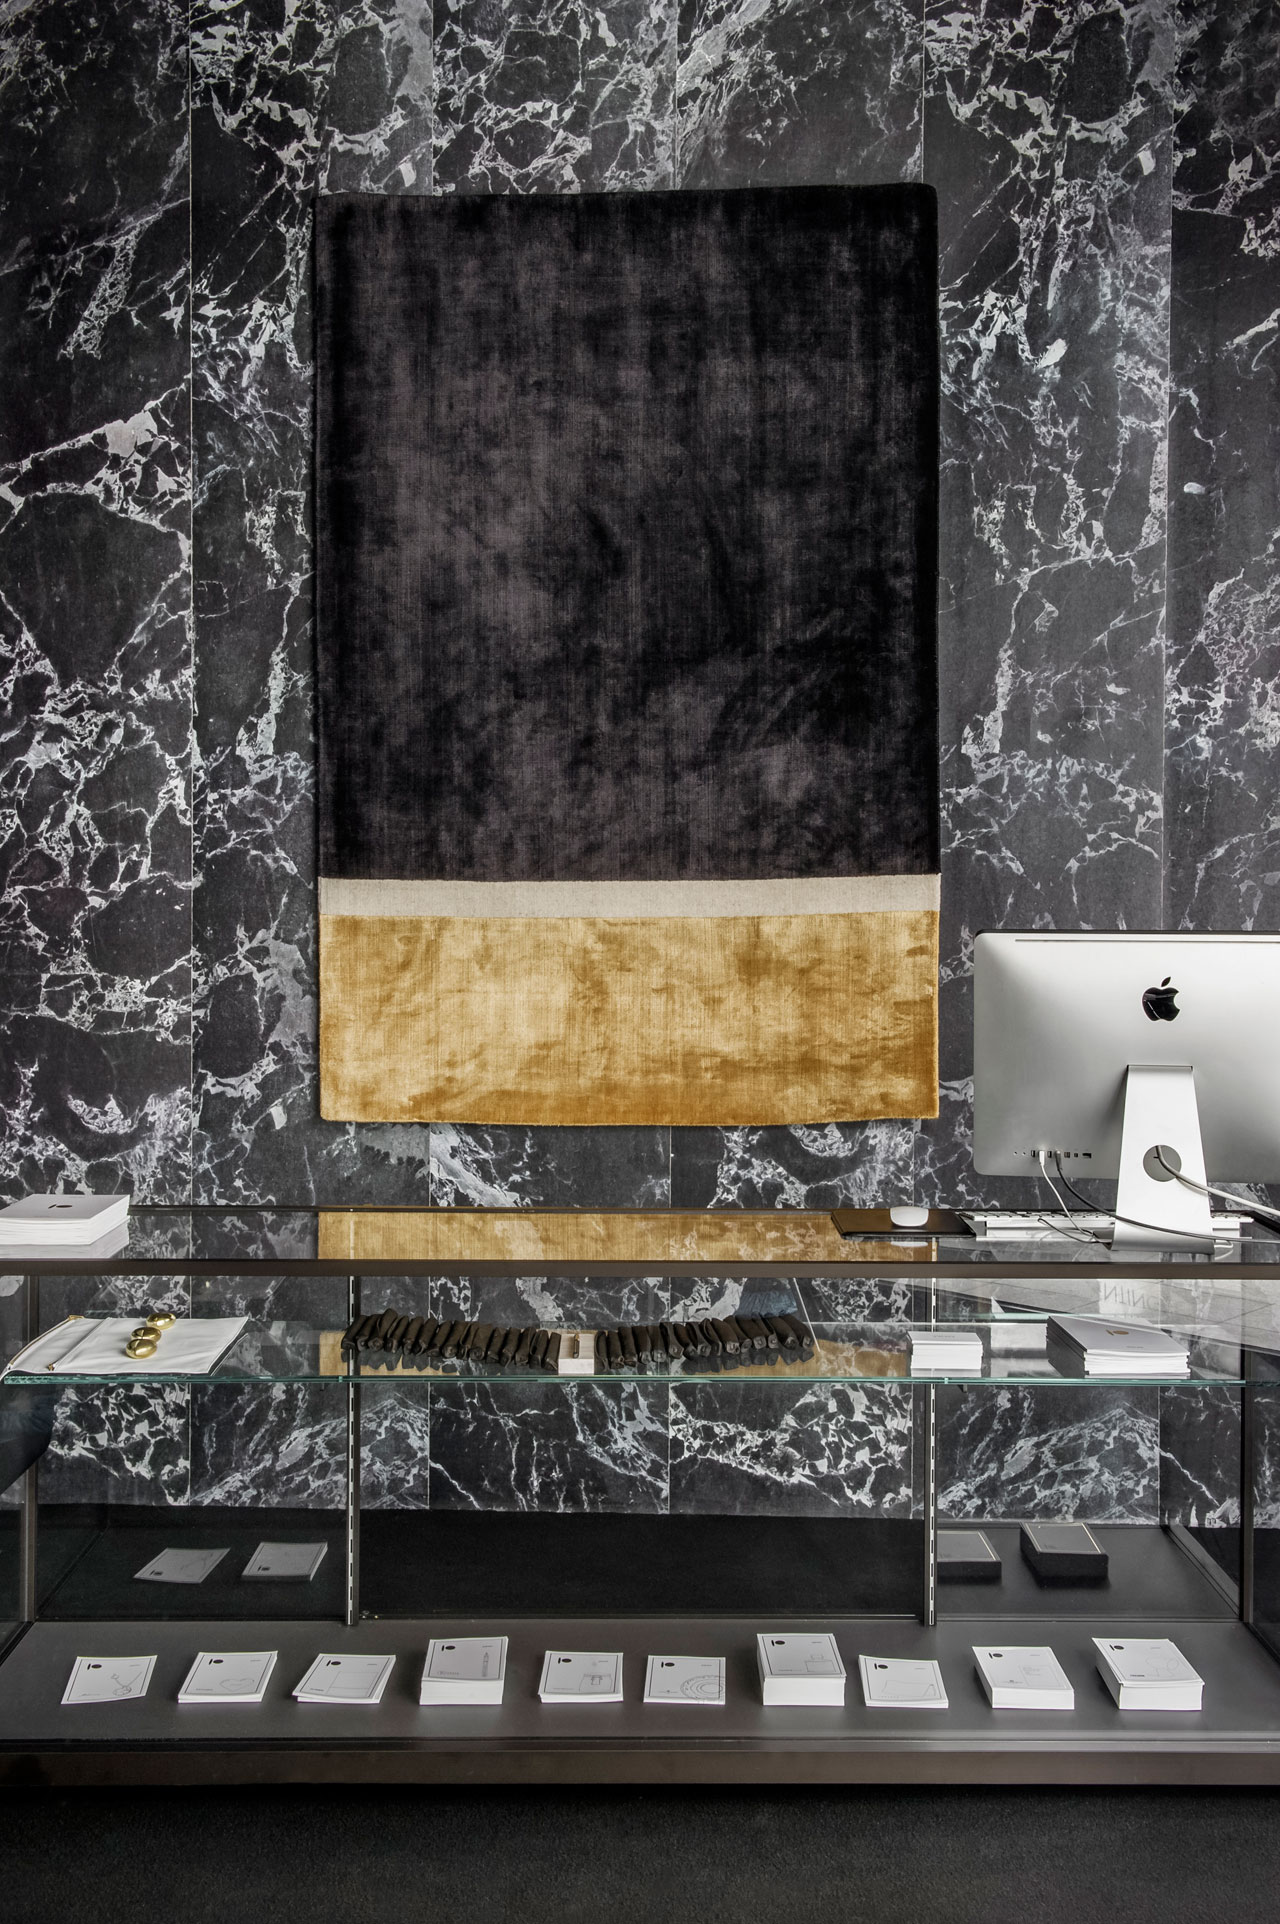 10 by Yatzer installation view at Spazio Pontaccio, Milan 2016. Wunderkammer Low Display Case by Piero Lissoni for Glas Italia. Materials Wallpaper in black marble by Piet Hein Eek for NLXL. Styling by Costas Voyatzis, photo by Fabrizio Annibali. 